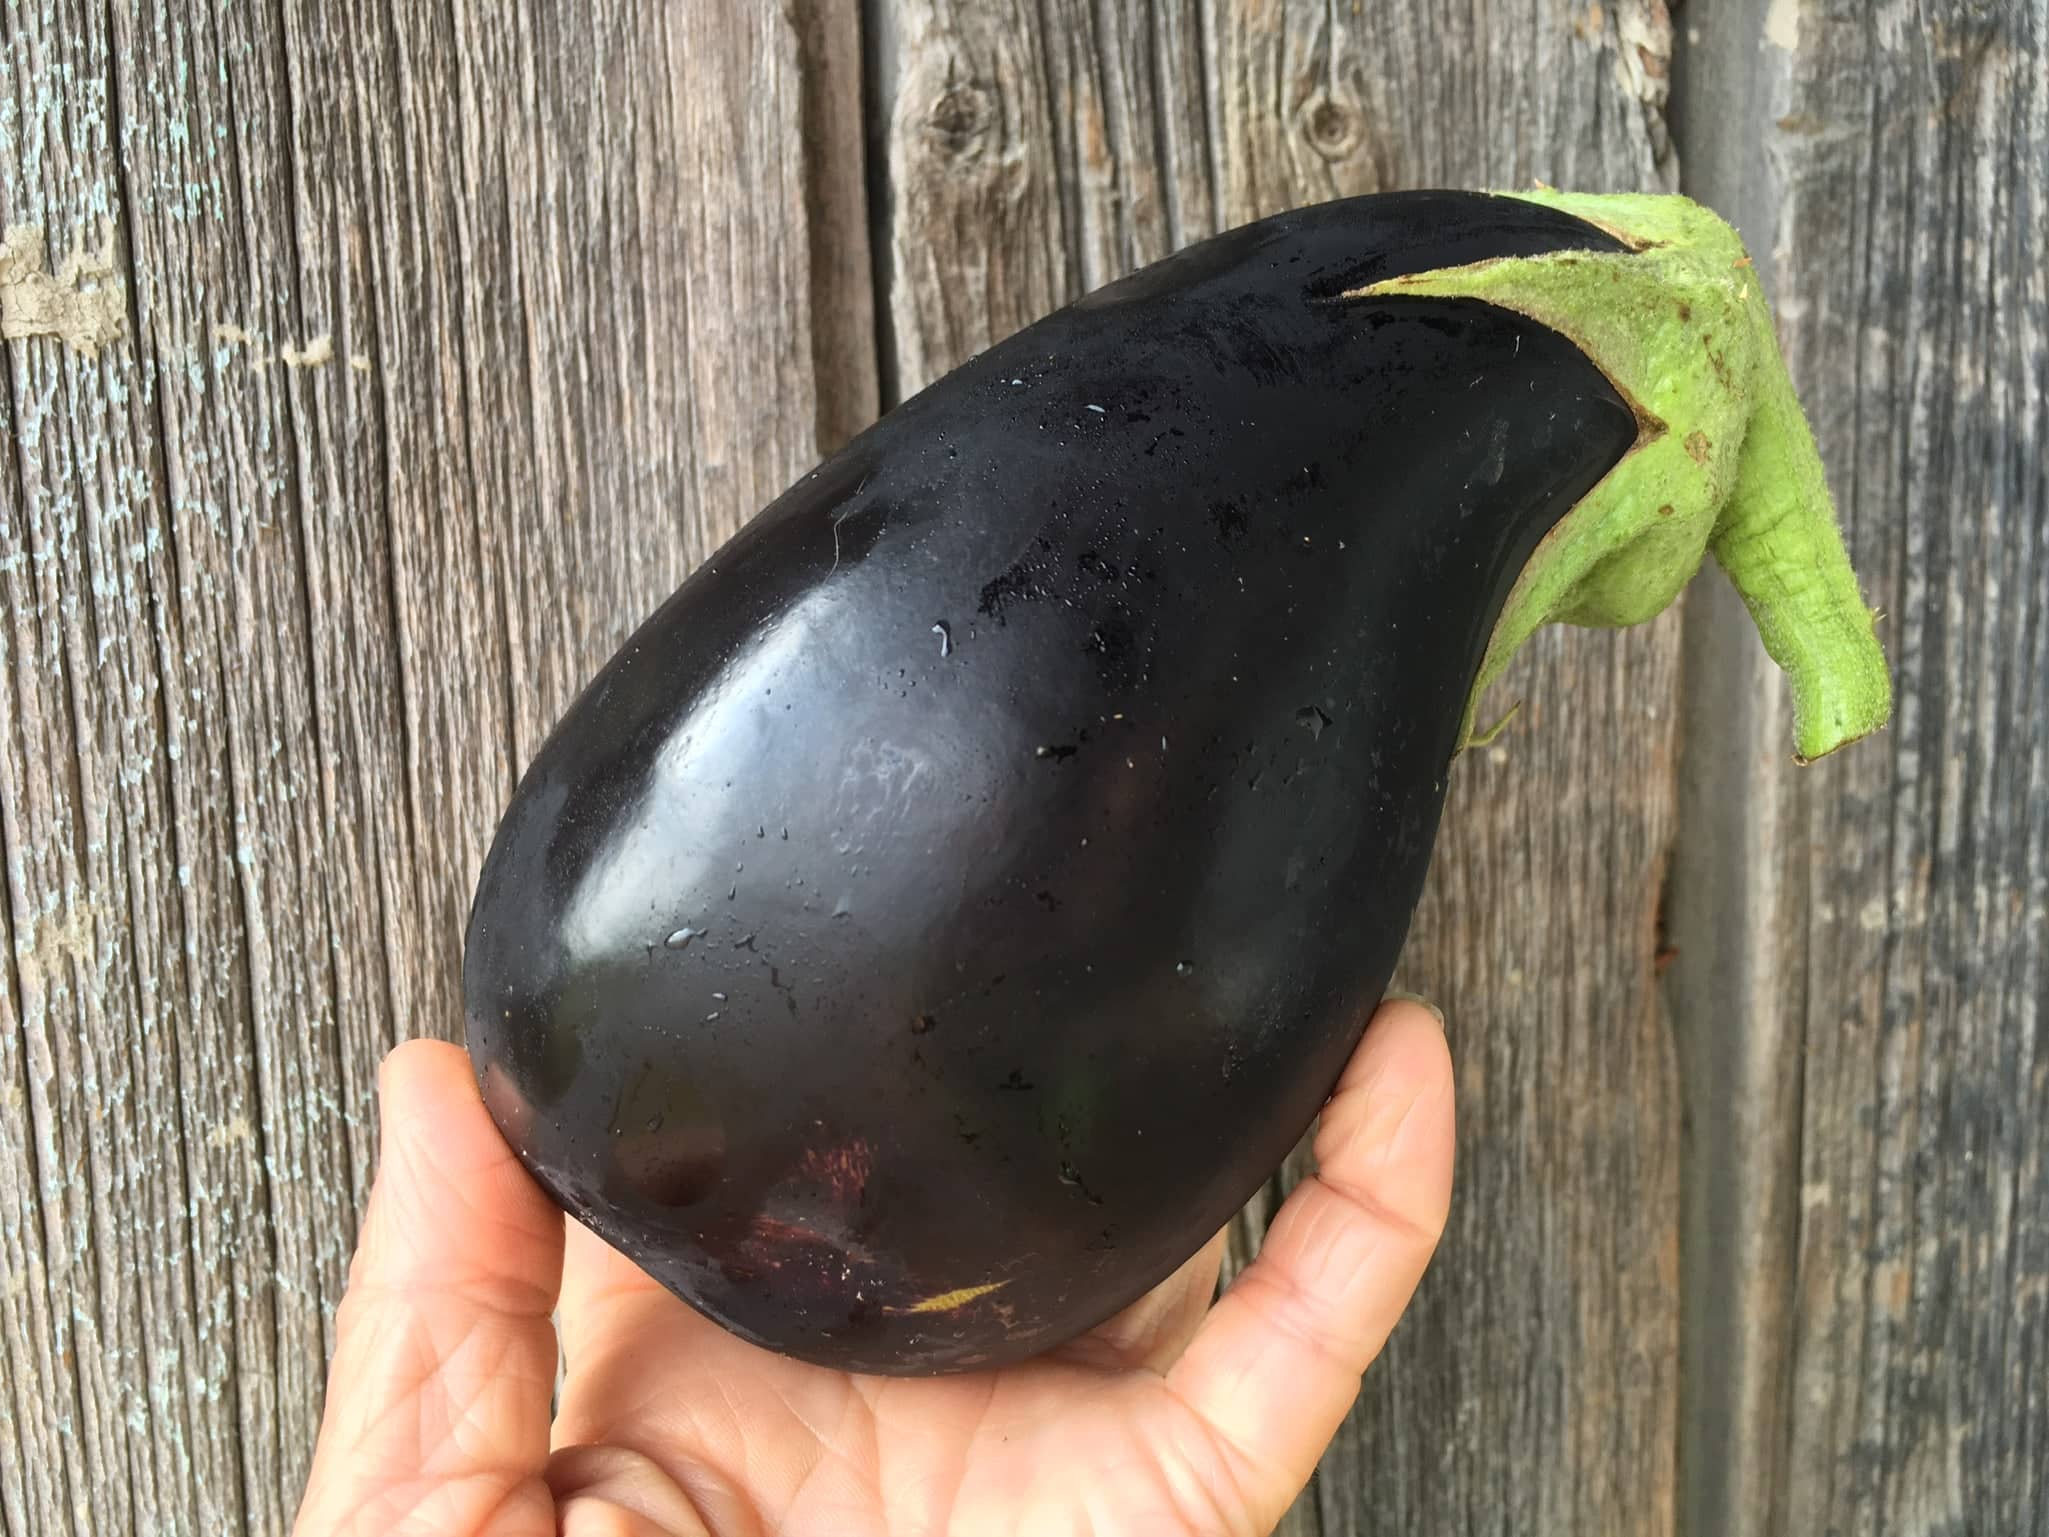 Organic Eggplant - Welcome Toronto Members and Ancient Sumerian Gods of Irrigation